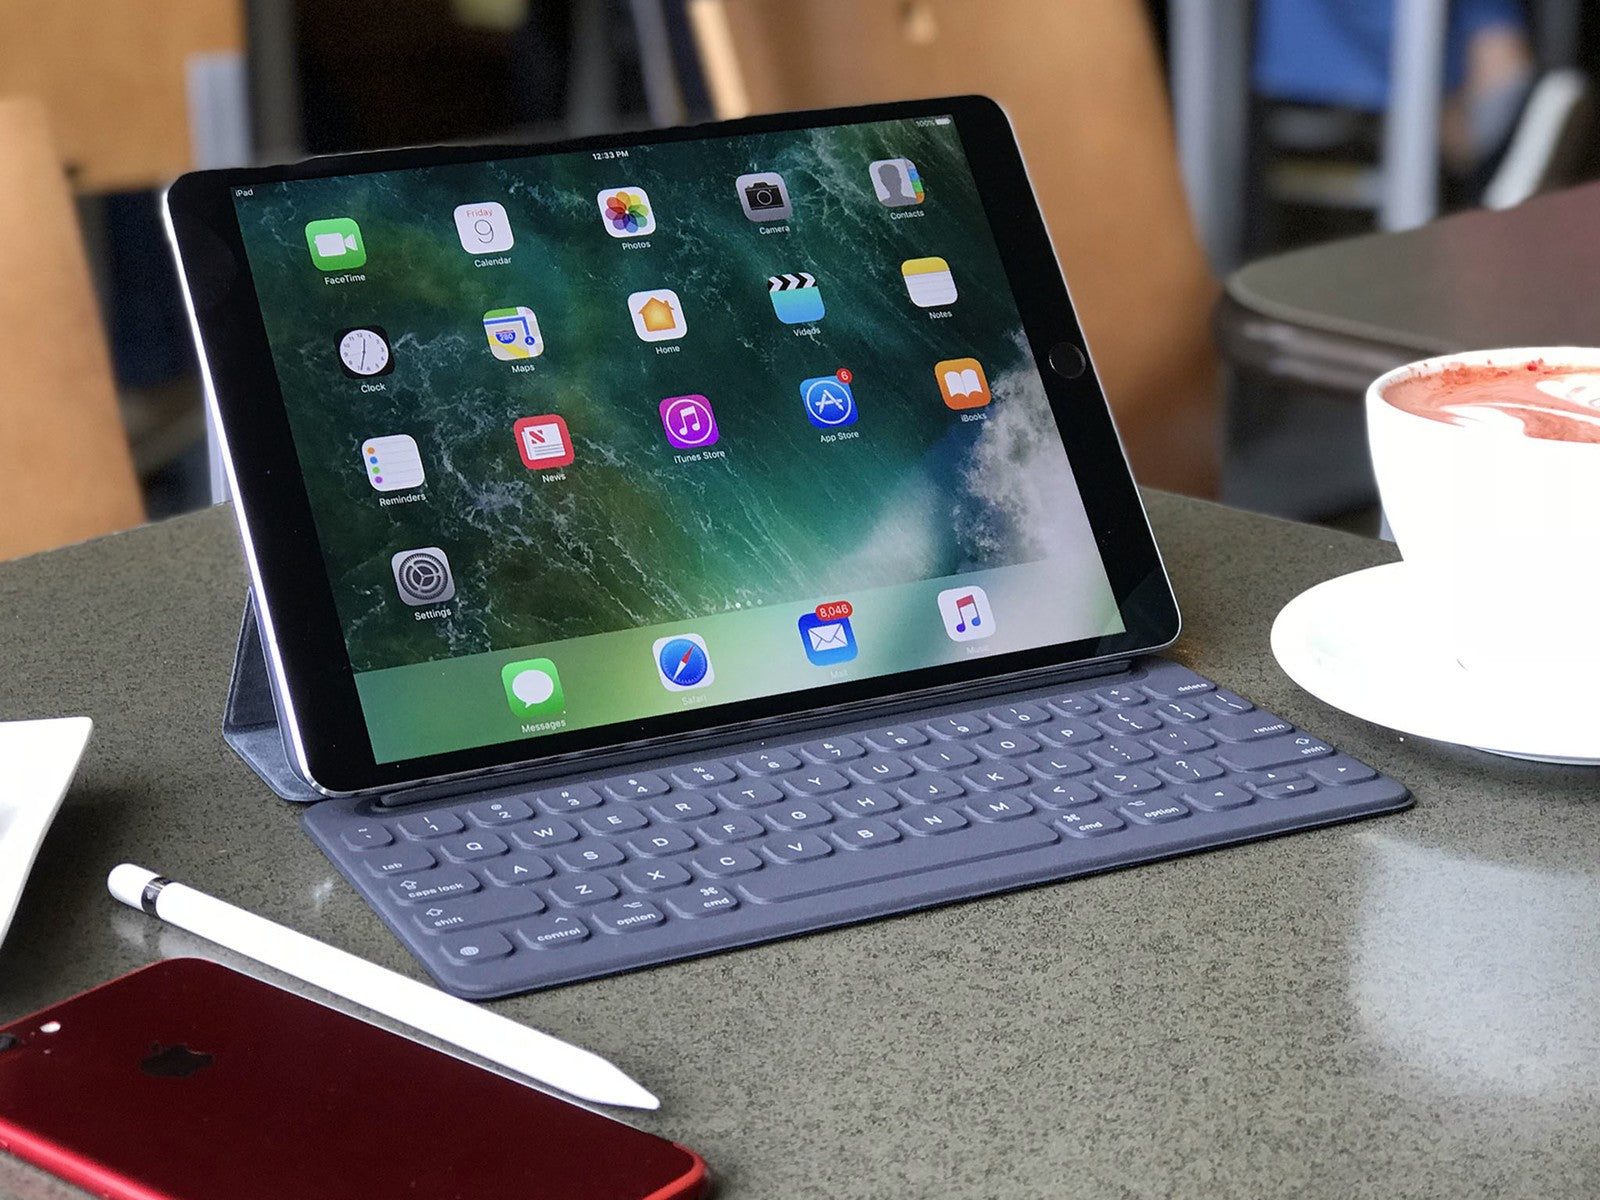 How Do I Charge 2018 iPad Pro Faster?